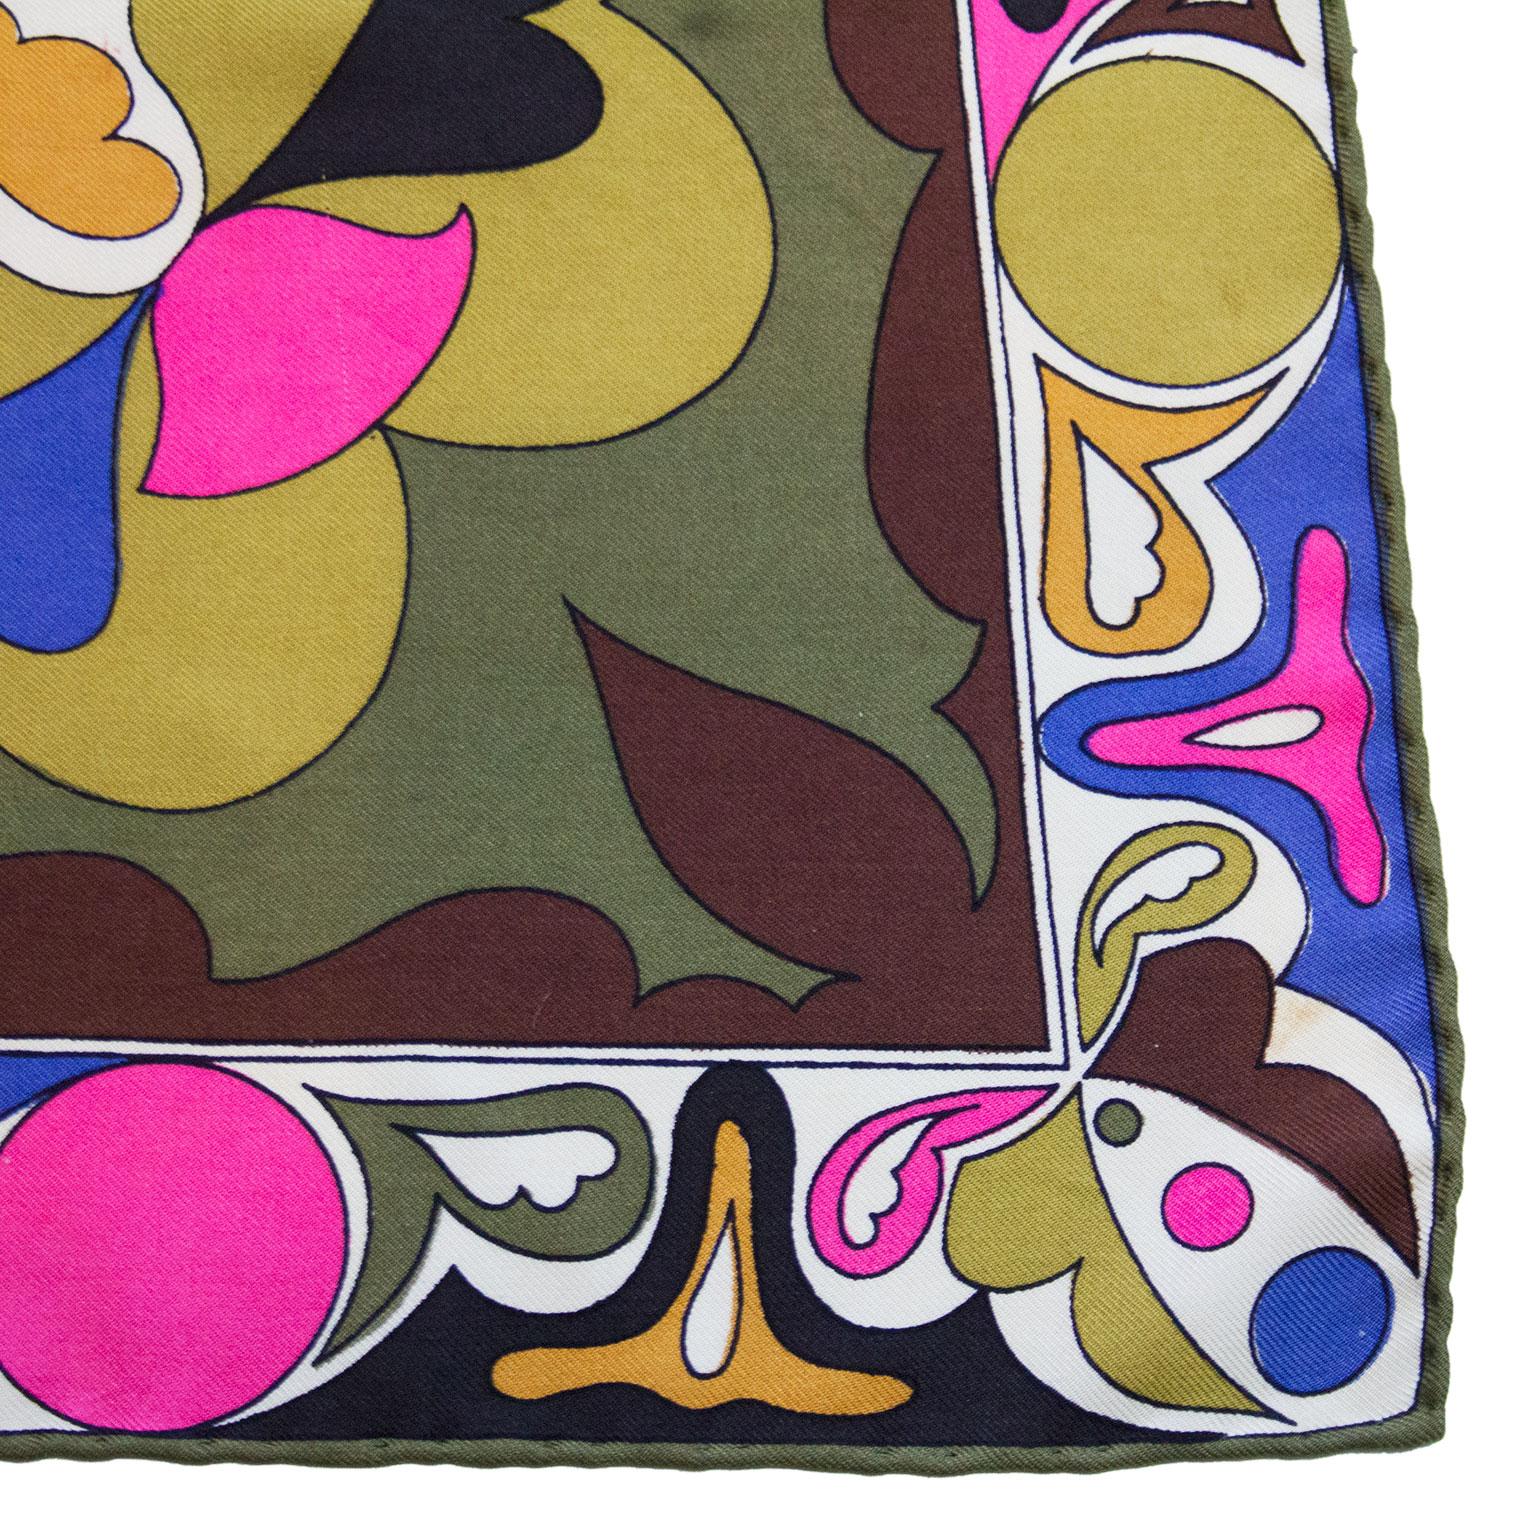 Late 1990s Emilio Pucci Brown, Pink and Forest Green Printed Silk Scarf im Zustand „Gut“ in Toronto, Ontario